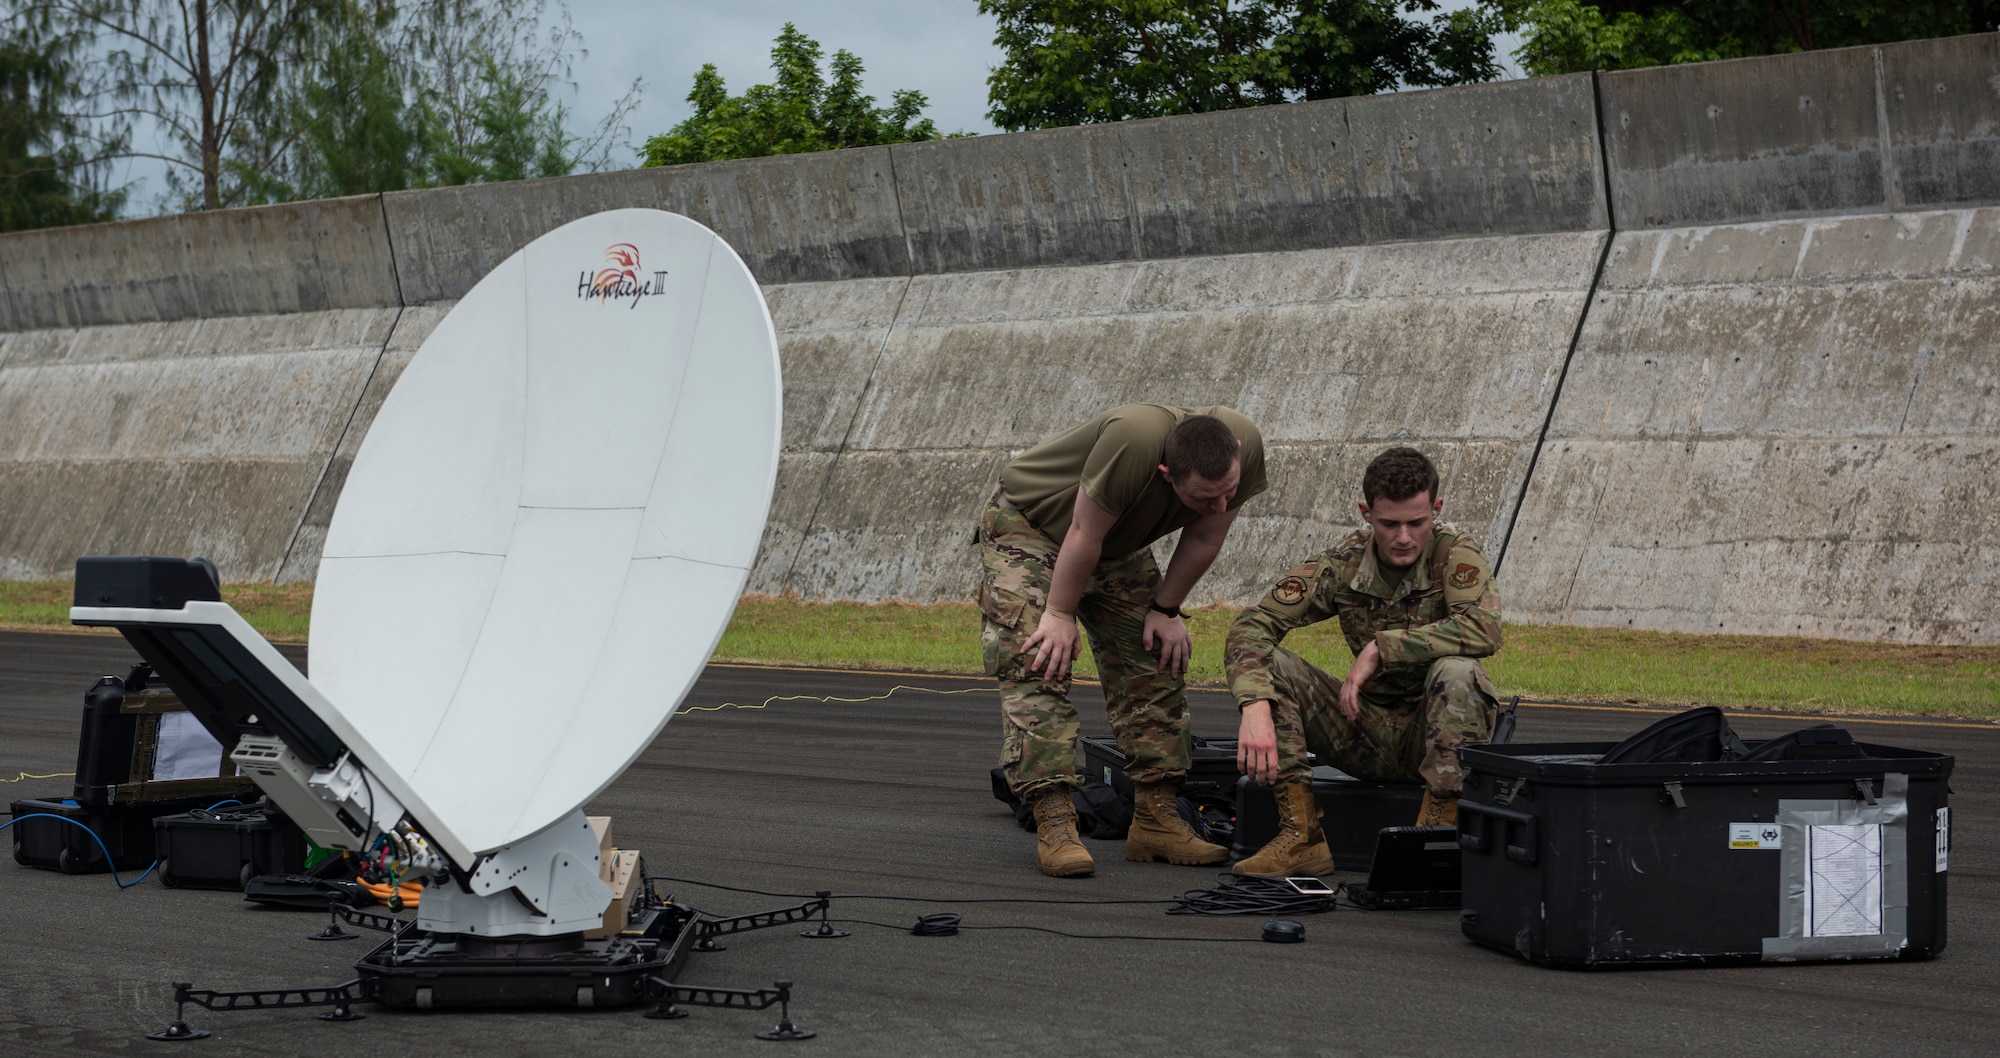 U.S. Air Force Staff Sgt. Daniel Steuer (left), a system supervisor assigned to the 374th Communications Squadron, Yokota Air Base, Japan, and USAF Airman 1st Class Kinsley Noel, a 374th CS radio frequency technician, set up a Hawkeye satellite at Babelthuap, Palau, during a Dynamic Force Employment, Nov. 23, 2020. DFE is an operational platform that allows our forces to be strategically predictable and operationally unpredictable. The U.S.’ steadfast commitment to the security and stability of the Indo-Pacific region remains unchanged. (U.S. Air Force photo by Senior Airman Michael S. Murphy)